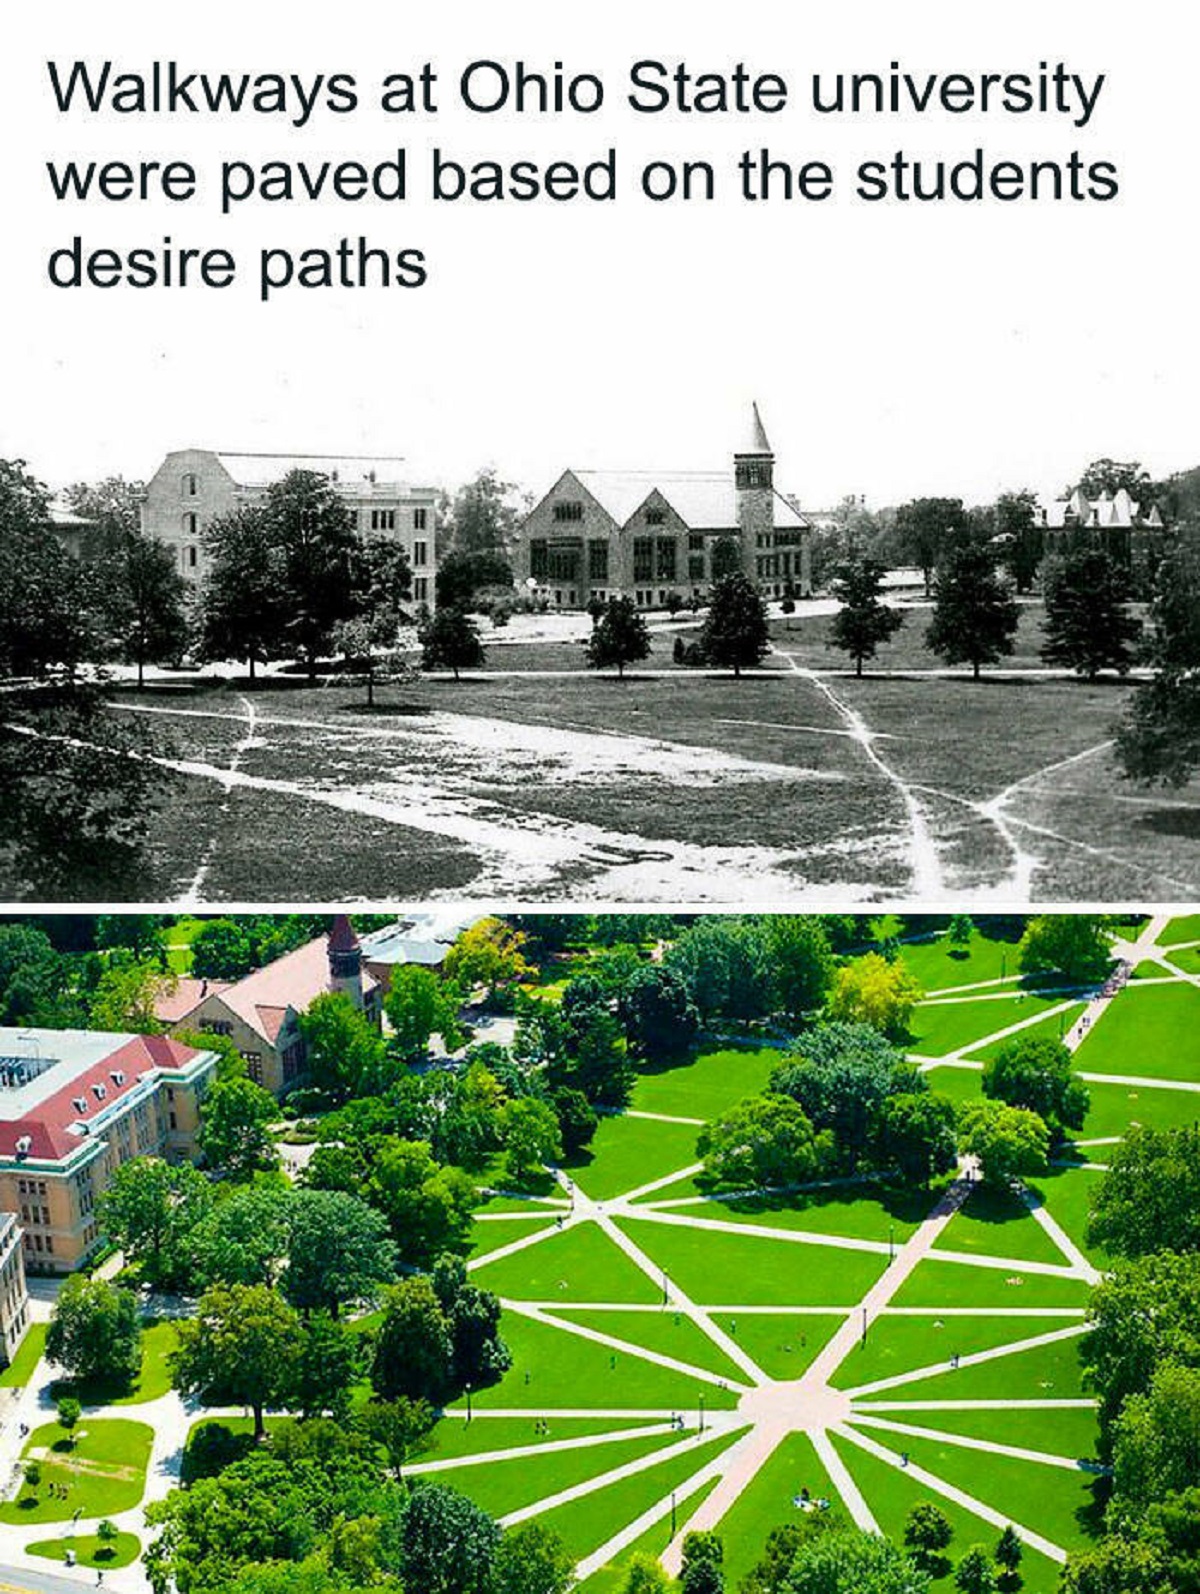 desire paths - Walkways at Ohio State university were paved based on the students desire paths